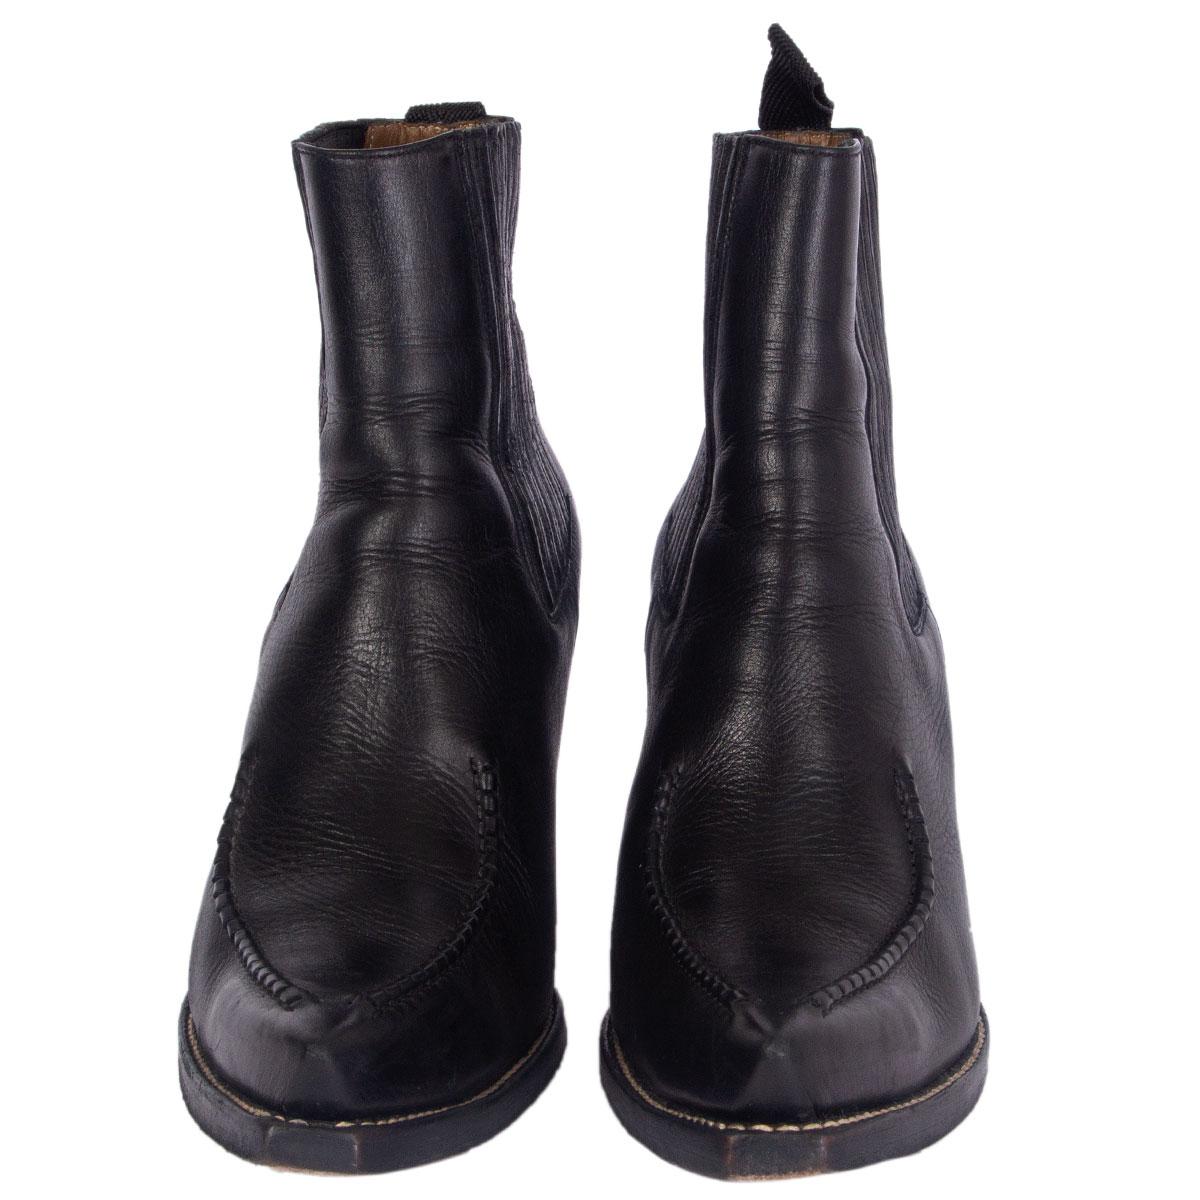 100% authentic Céline Santiag western ankle-boots in black calfskin featuring tapered toe with contrast top-stitching in cream color. Thick angled wedged heel and elasticated inserts on the side. Have been worn and are in excellent condition.